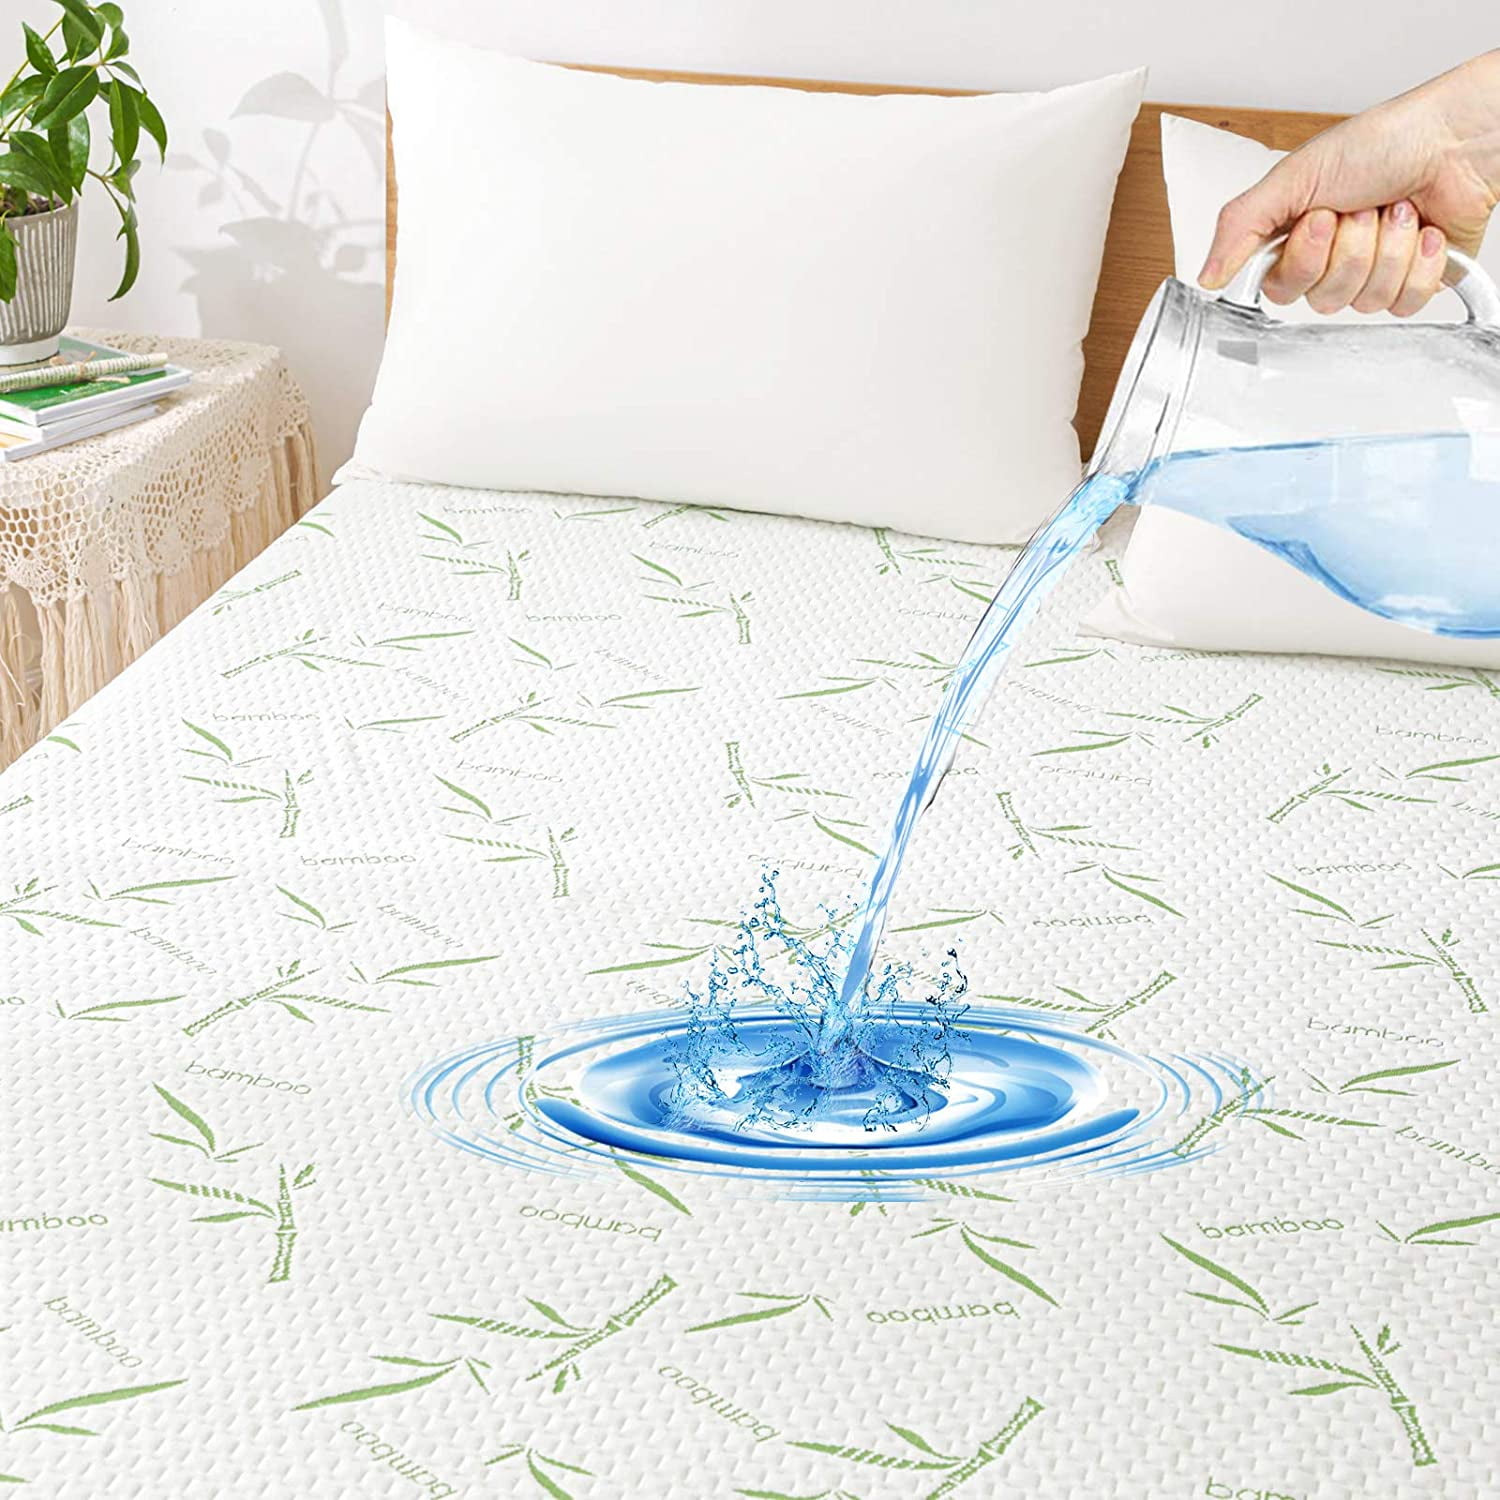 Details about   Bamboo Mattress Protector Topper Bed Cover Pad Waterproof Soft Washable All Size 